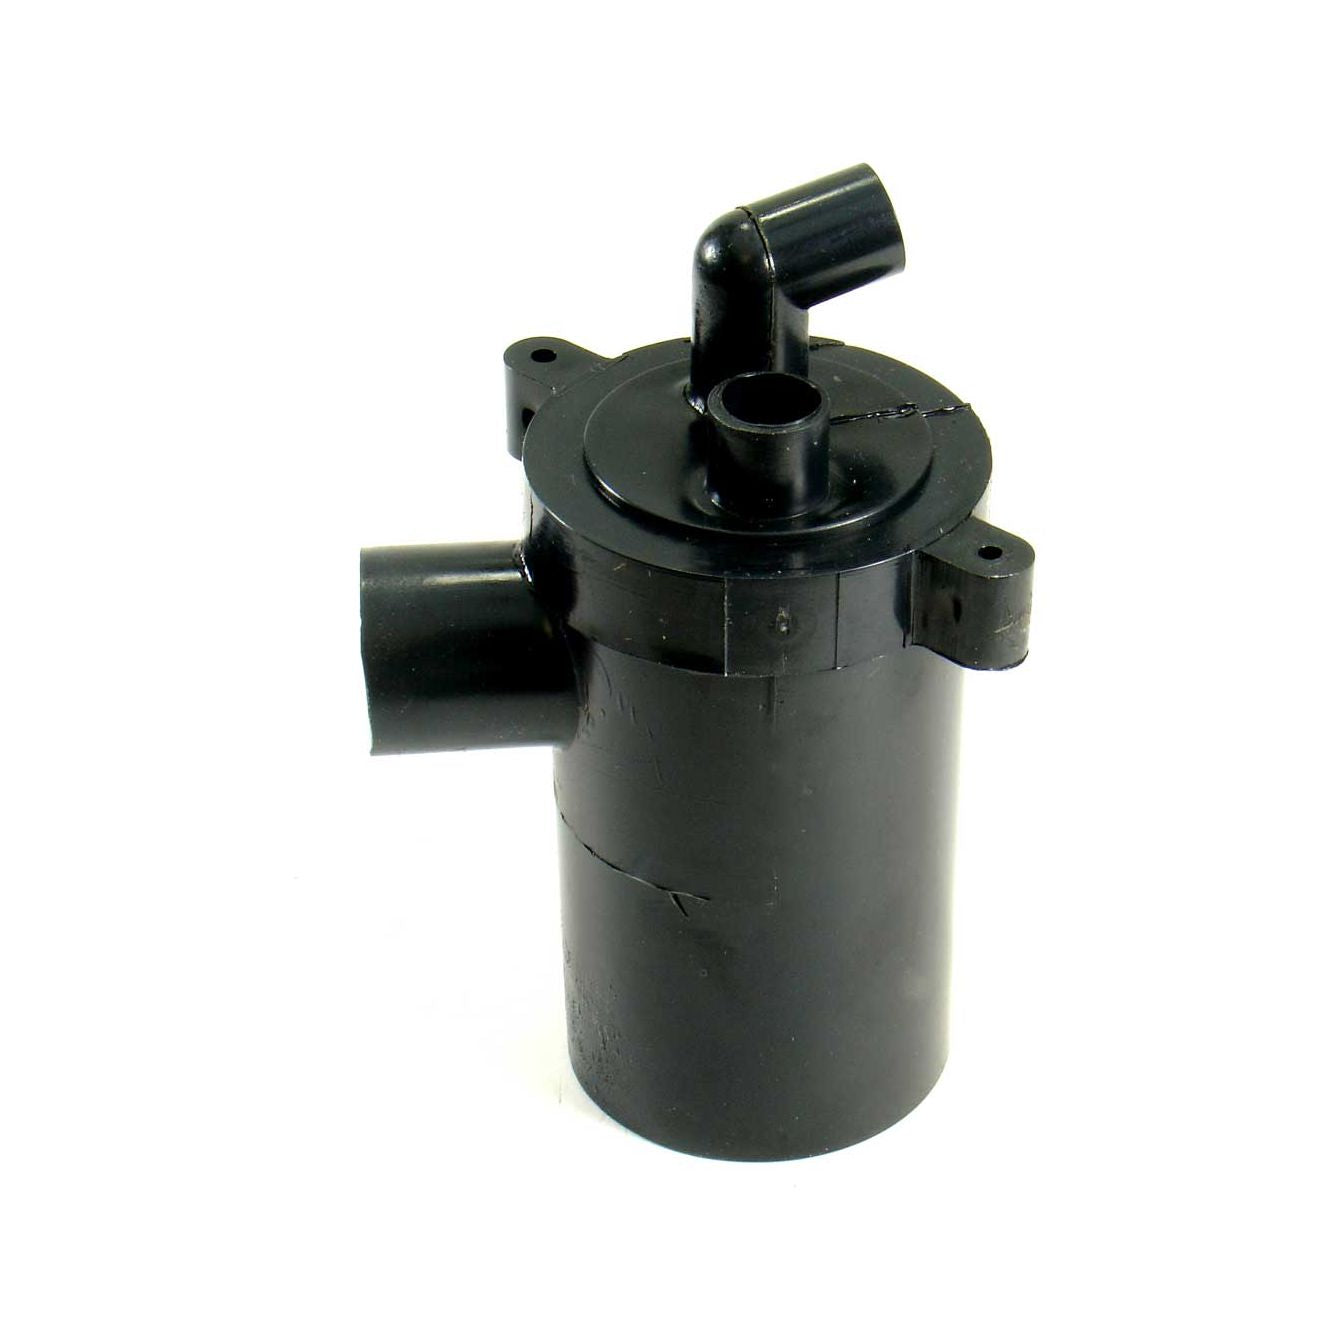 68-24120-02 - Drain Trap Assembly